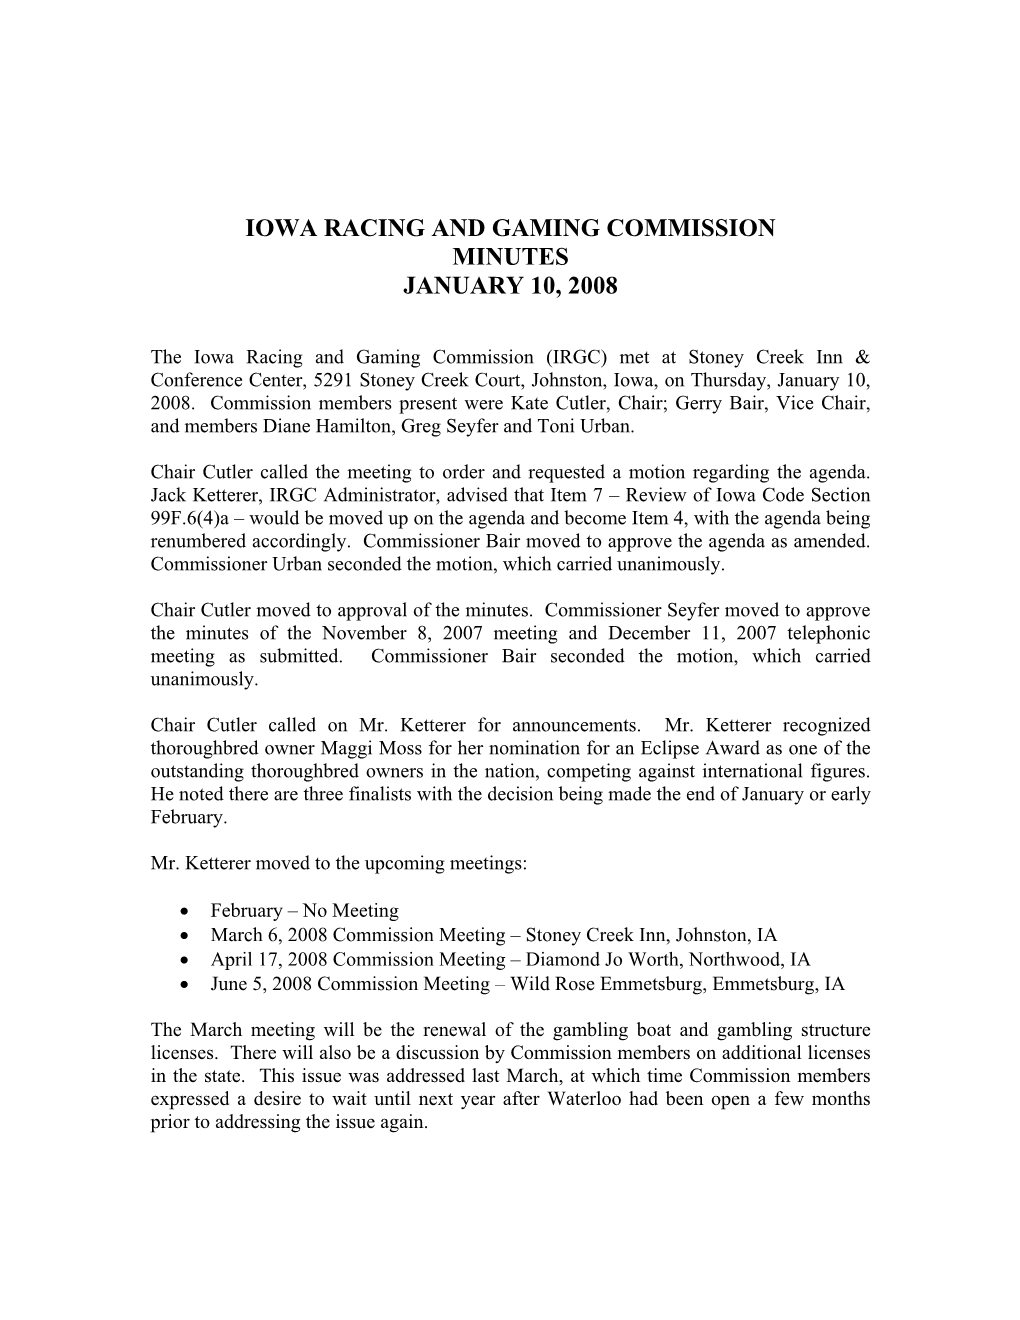 Iowa Racing and Gaming Commission Minutes January 10, 2008